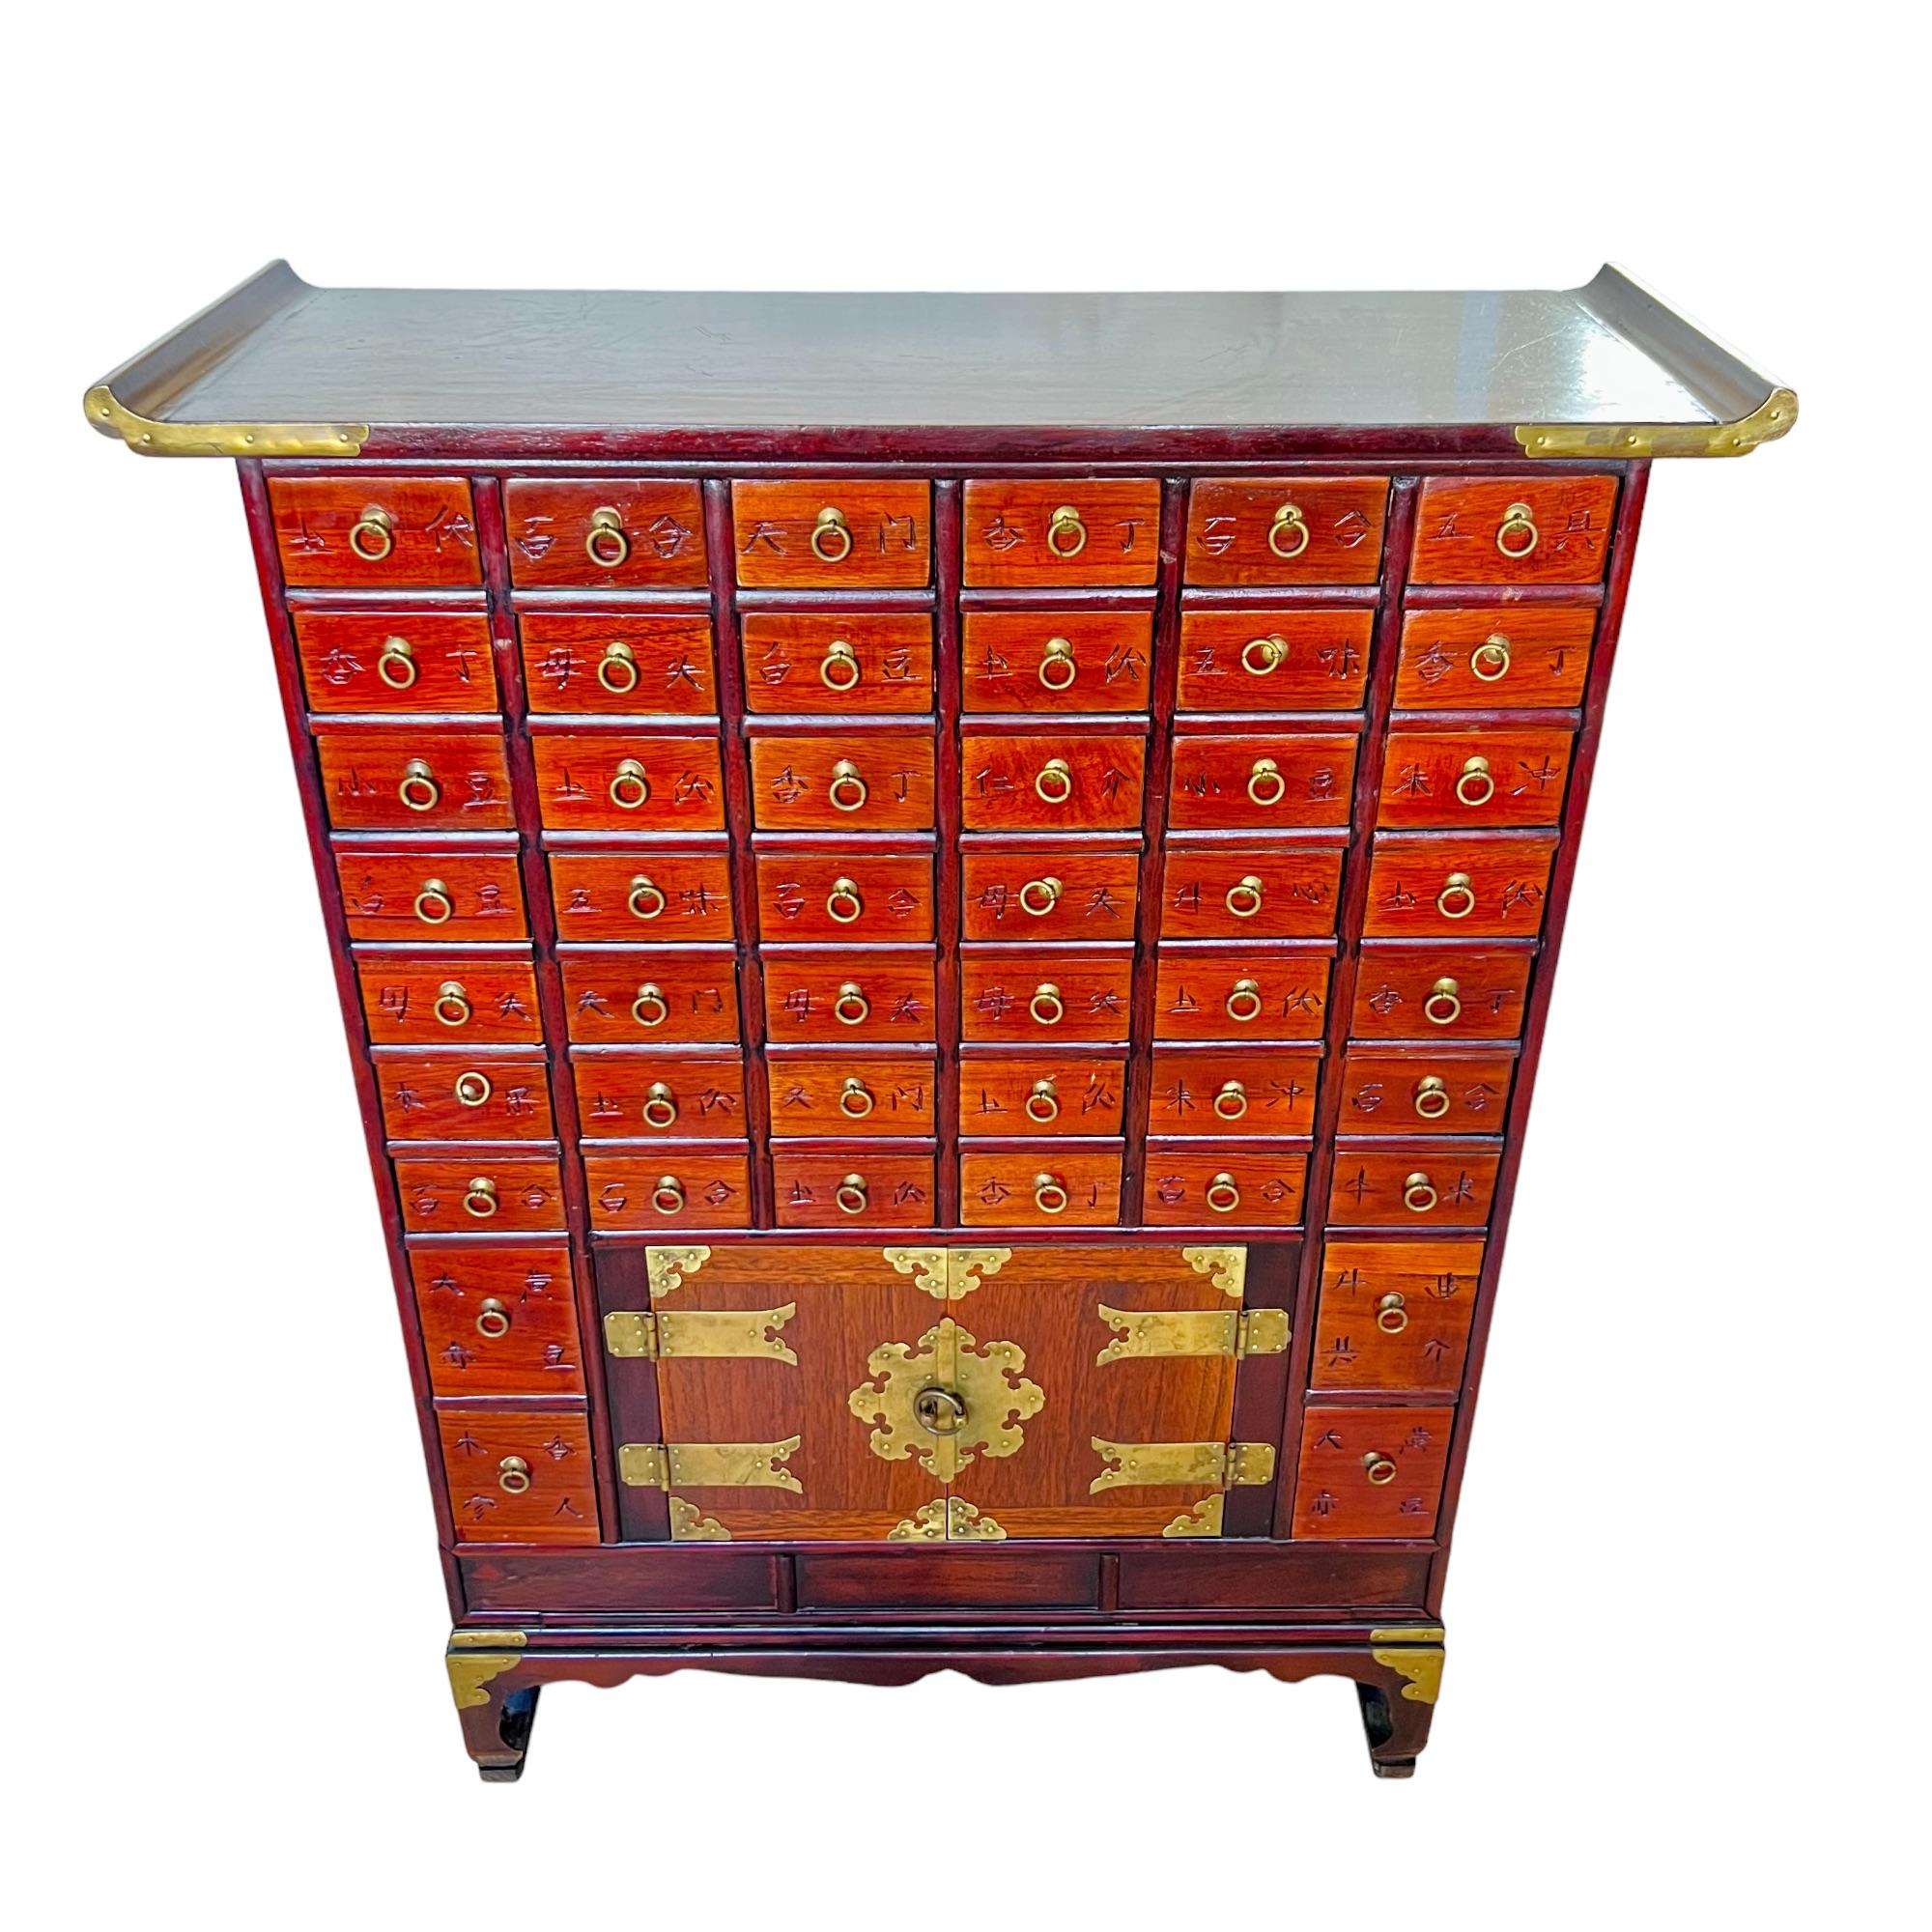 An early to Mid-20th century Korean elm and rosewood apothecary chest. This eye-catching medicine cabinet features a torii style rosewood top with brass mounts and boasts a total of forty-eight elm wood drawers - forty-four upper, four middle and